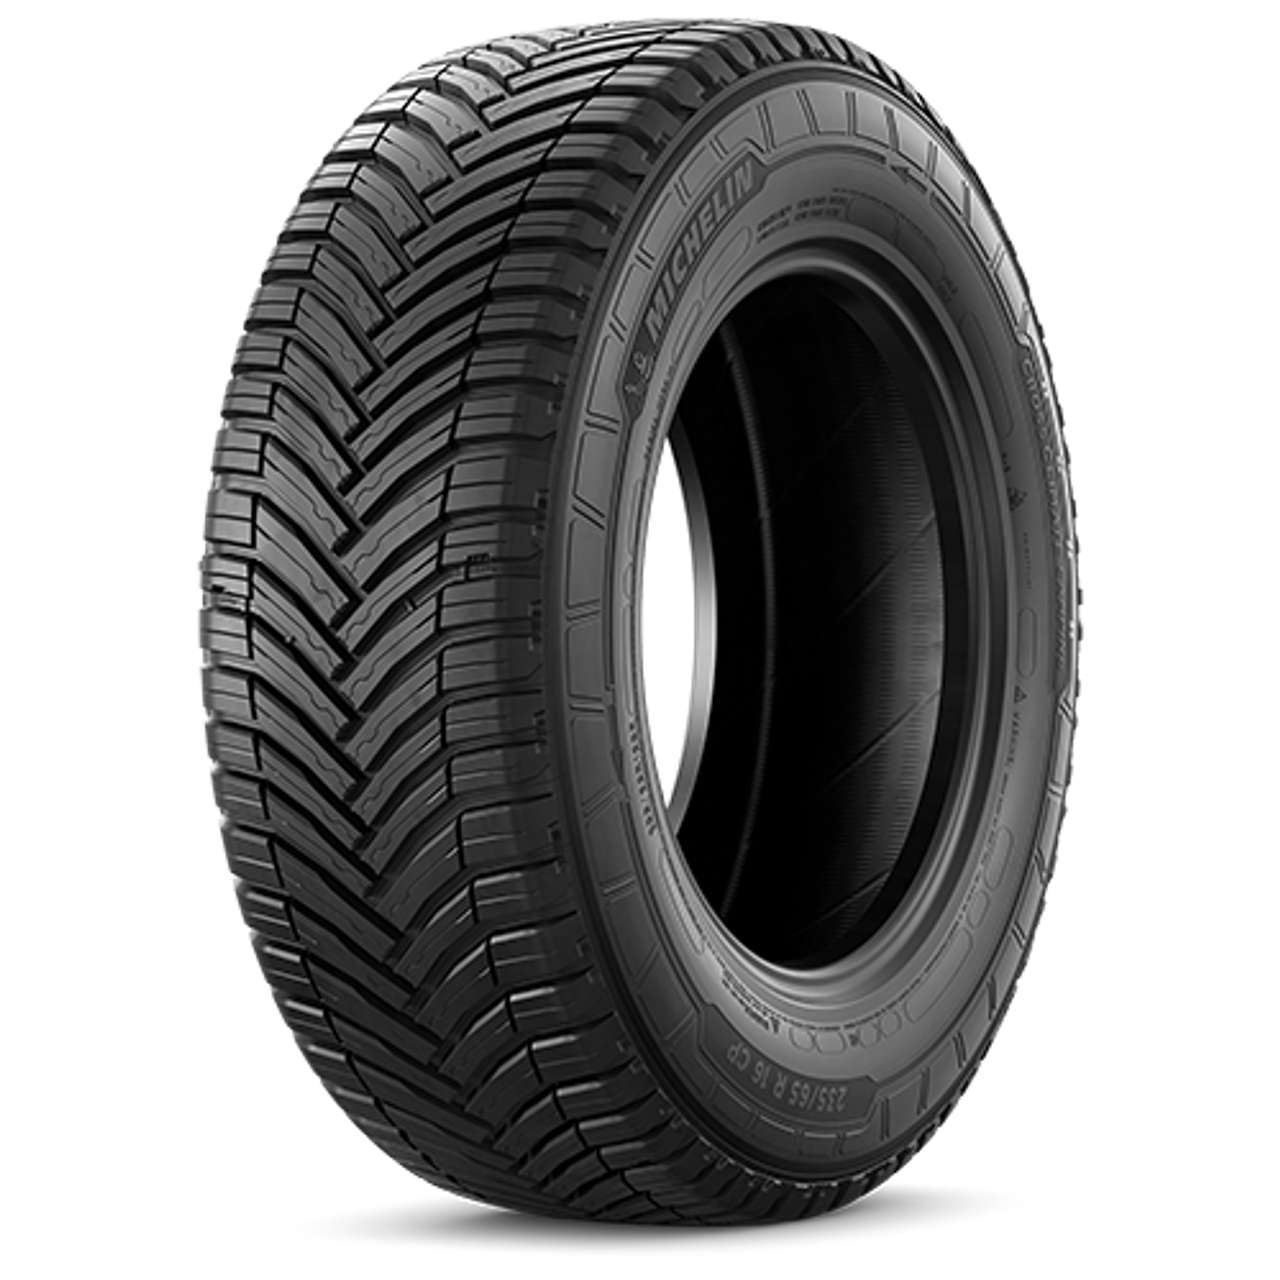 MICHELIN CROSSCLIMATE CAMPING 225/75R16 118R BSW